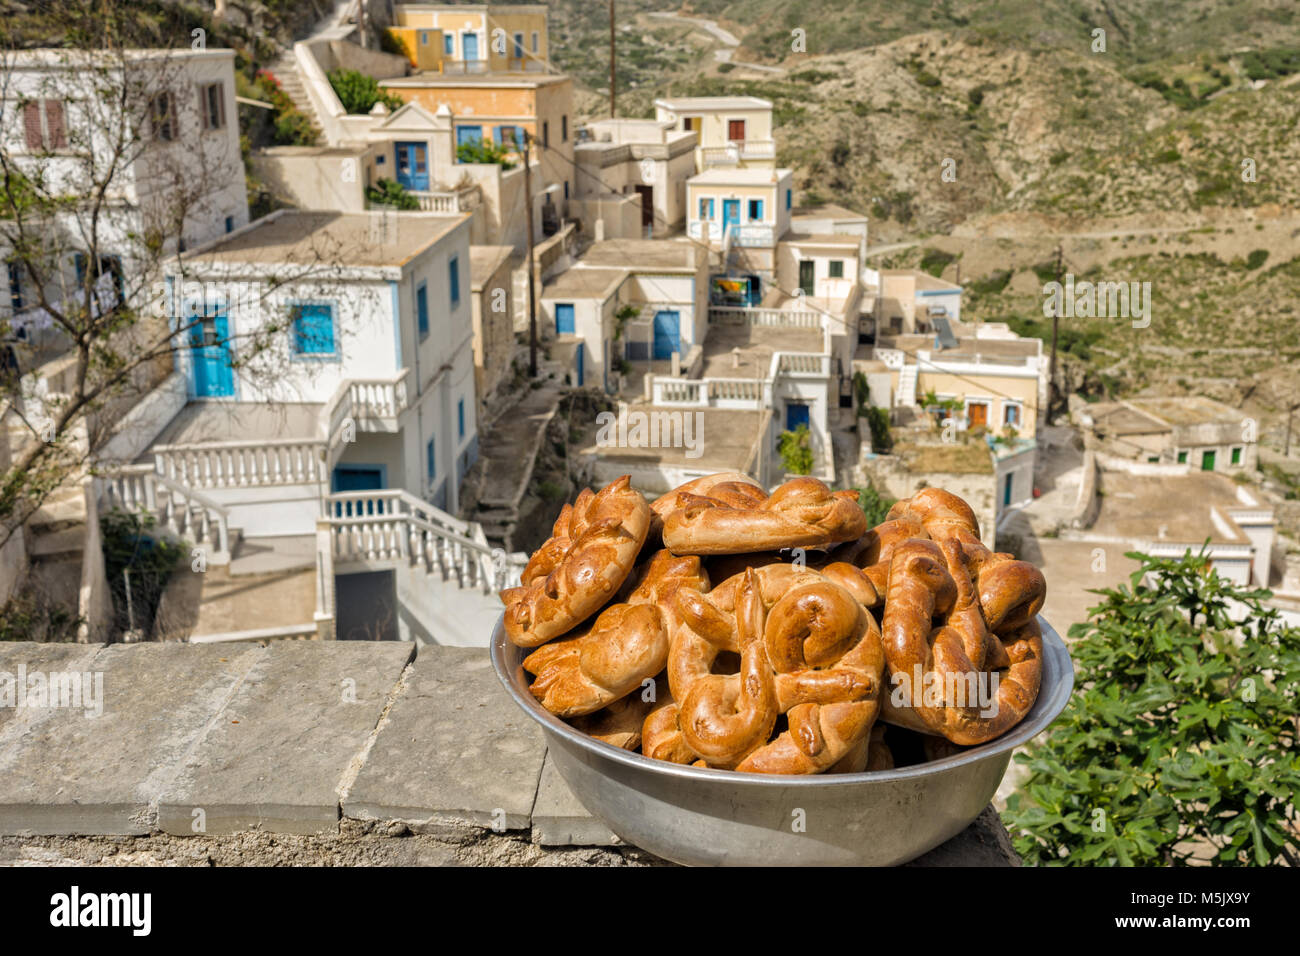 Greece, Aegean Islands, Olympos, Karpathos island, The village of Olympos seem timeless. to make bread is one of the main activities of the women Stock Photo